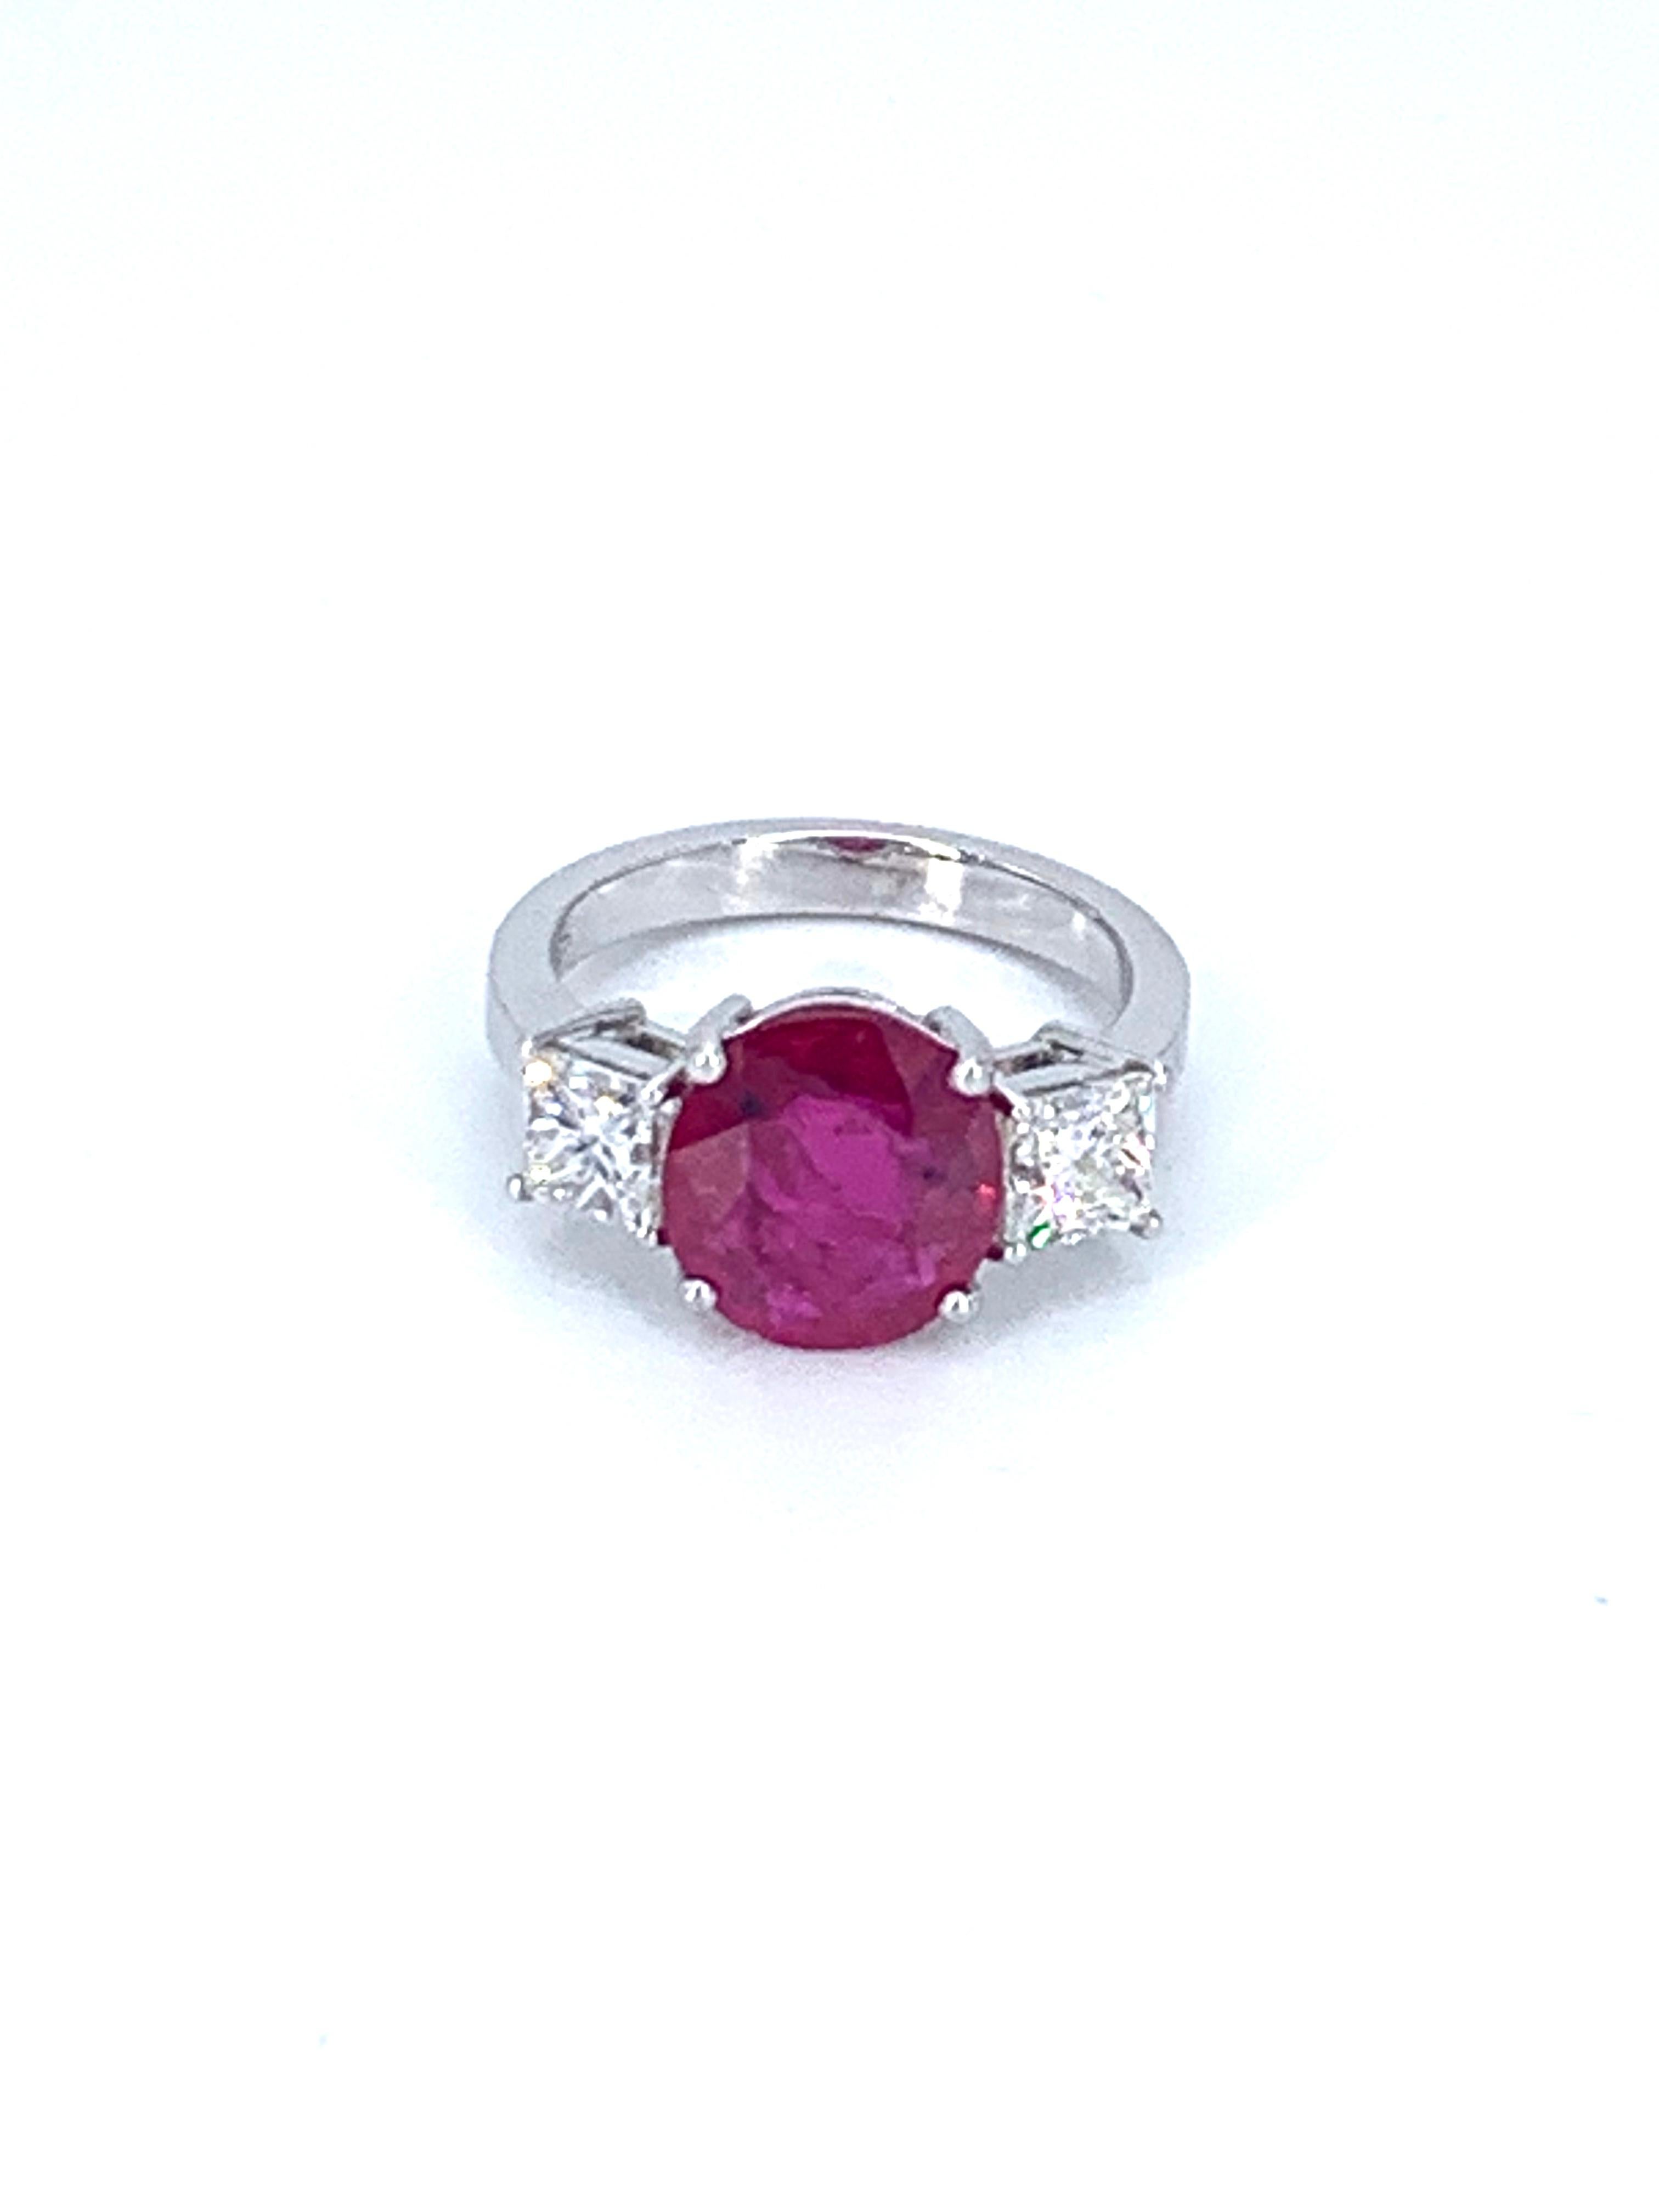 This natural Ruby from Burma is 3.27 Carats & with the 1.41 Carat diamond, it radiates a beauty indescribable in words.

The round red Ruby sits boldly in the center of the ring with 2 princess cut natural white diamonds either side amounting to